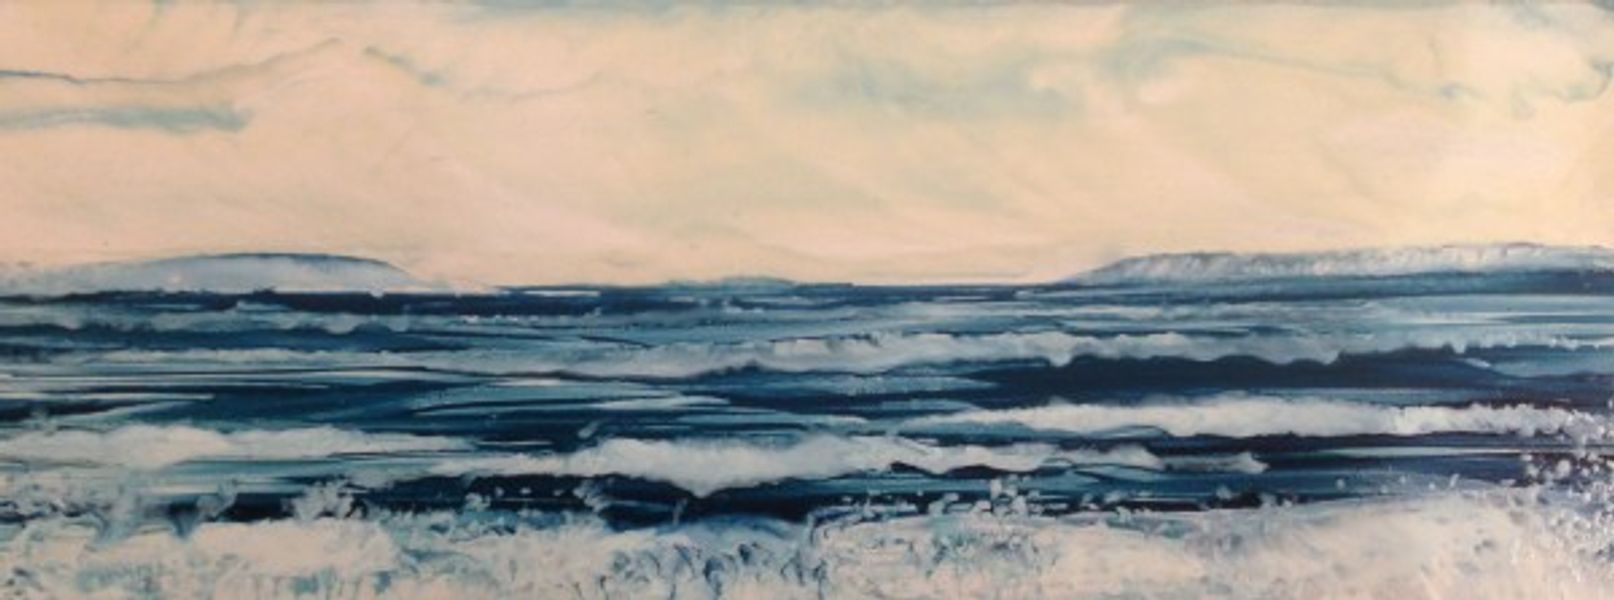 Seascape painted by Phil Madley in encaustic wax